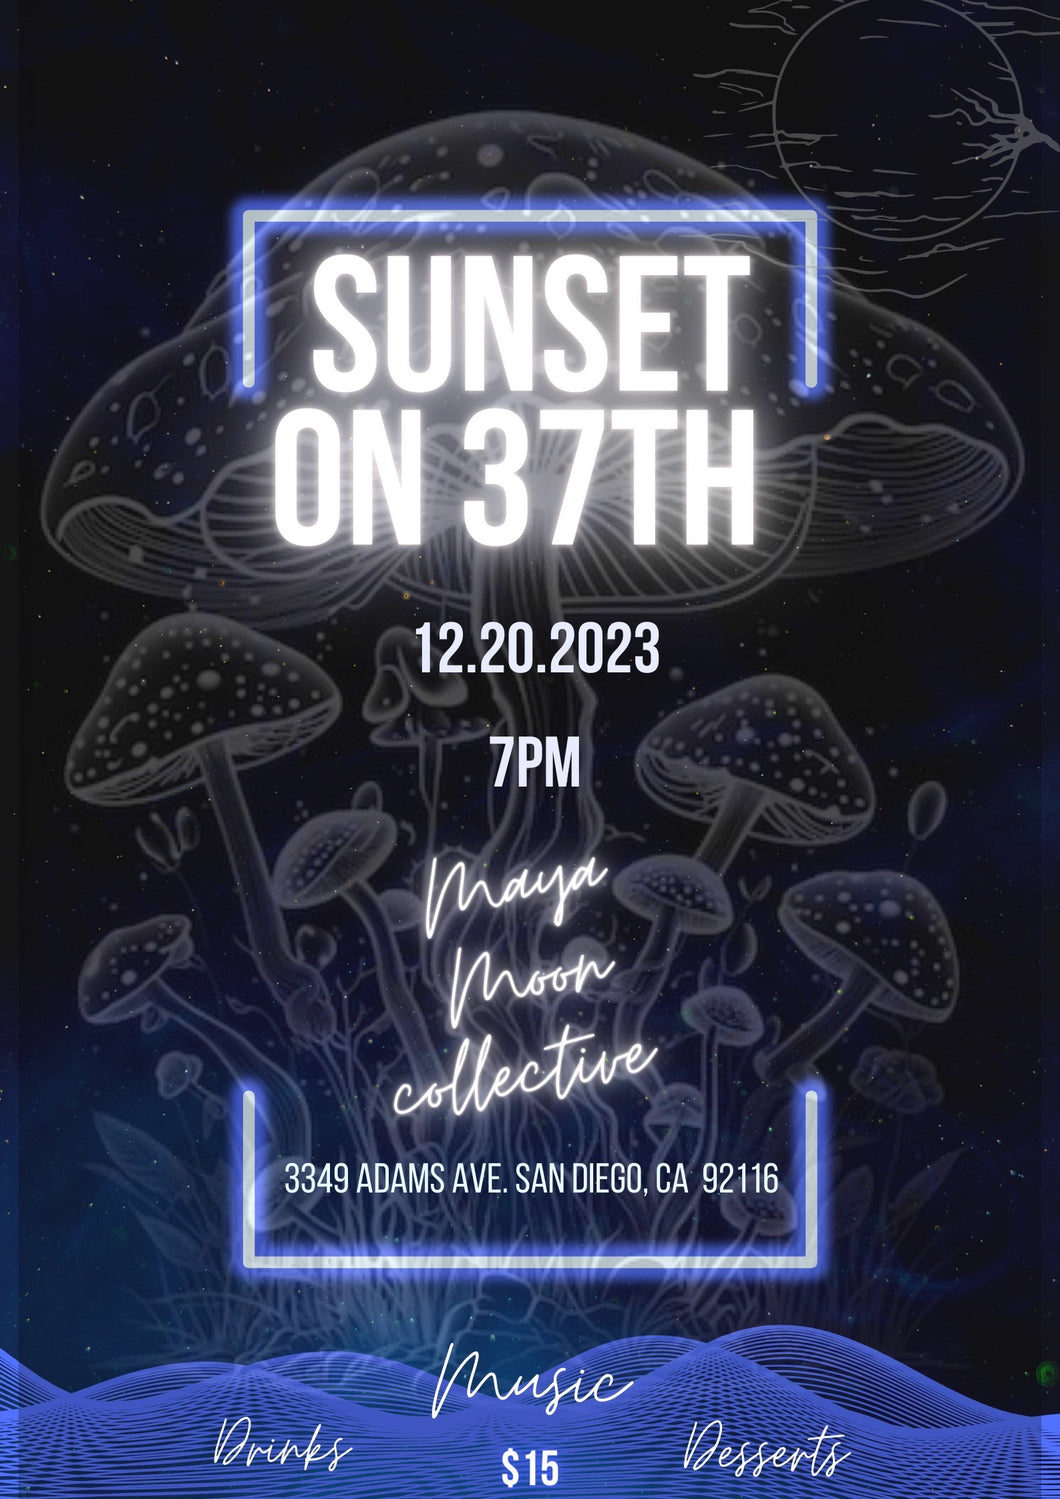 Concert with Sunset on 37th